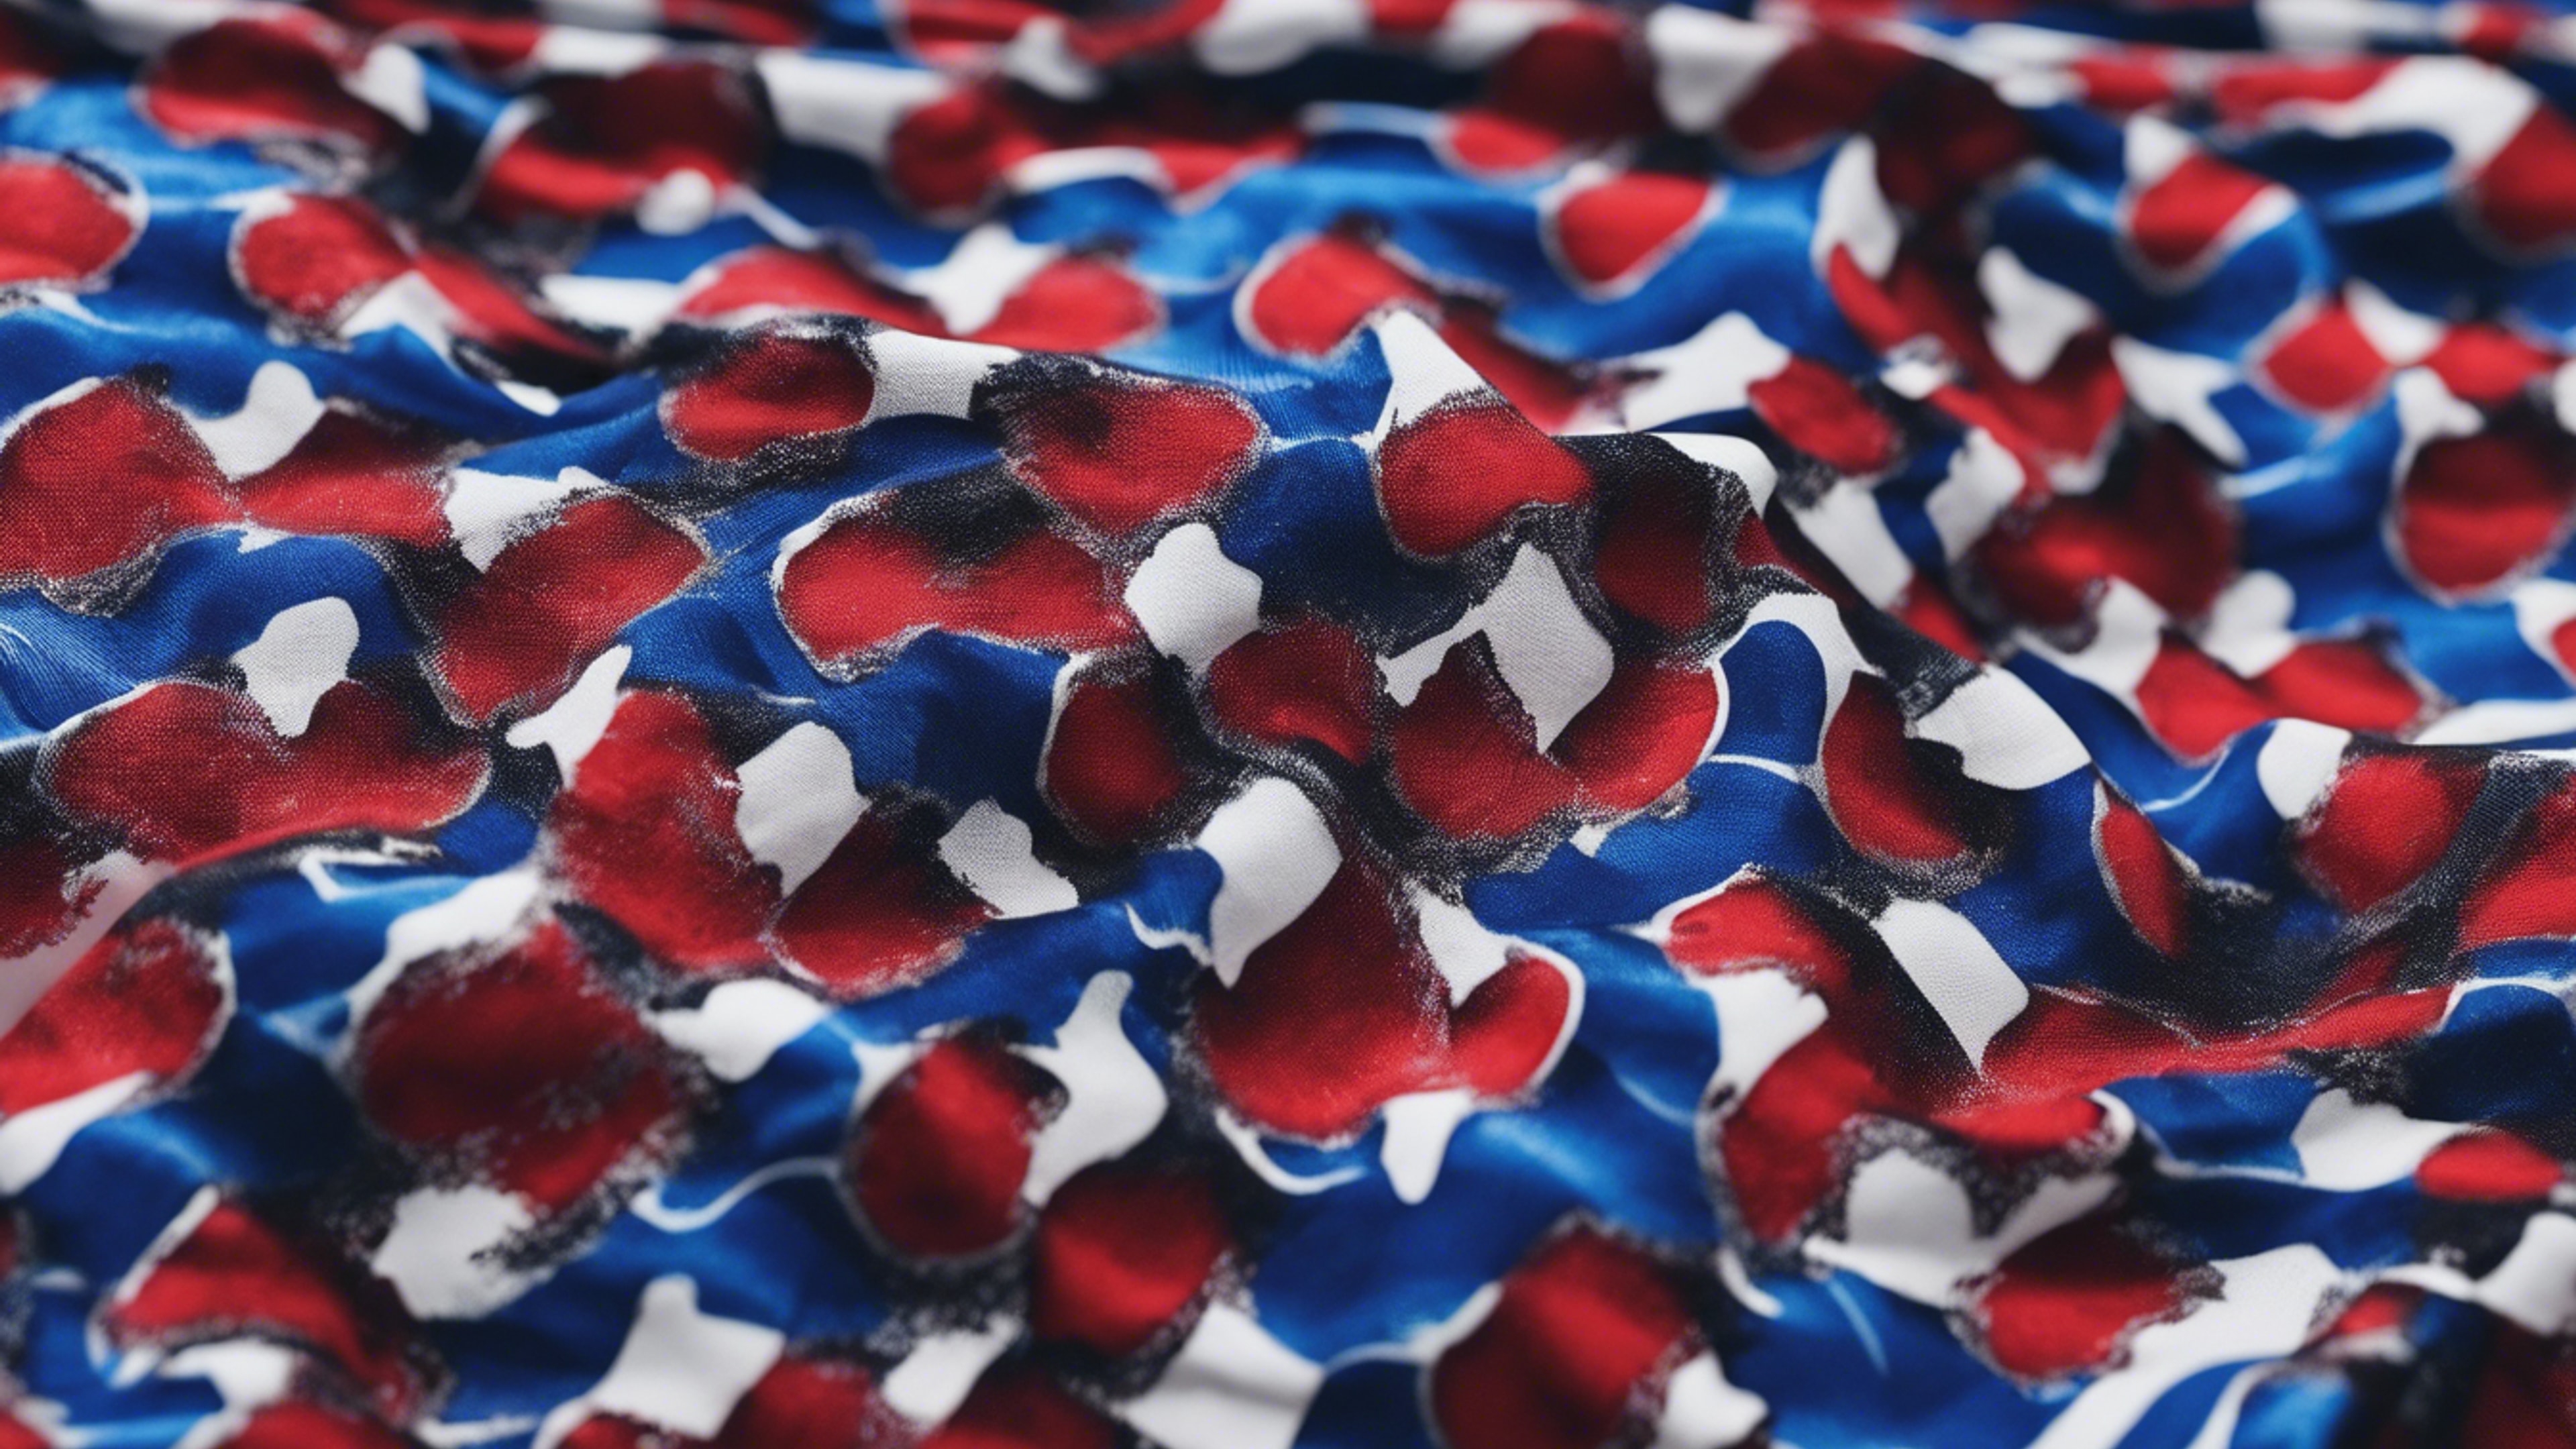 A pattern of a jacket using red and blue camo. Валлпапер[dc85284079f94842886c]